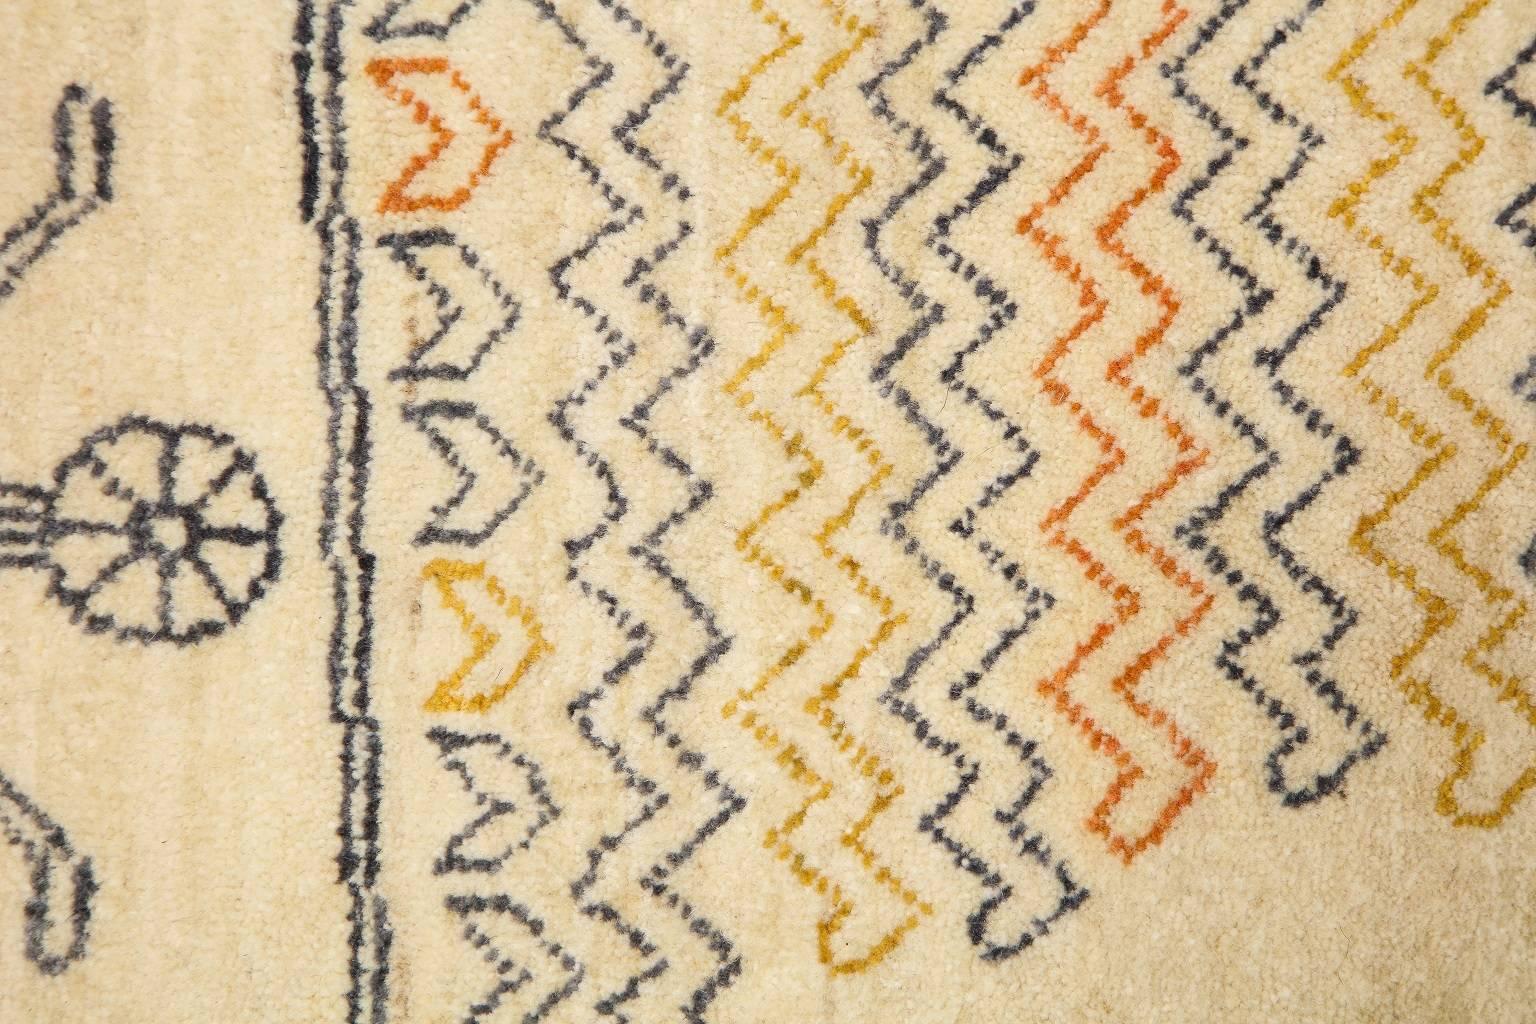 Orley Shabahang Signature Duality Carpet in Handspun Wool and Vegetable Dyes 2